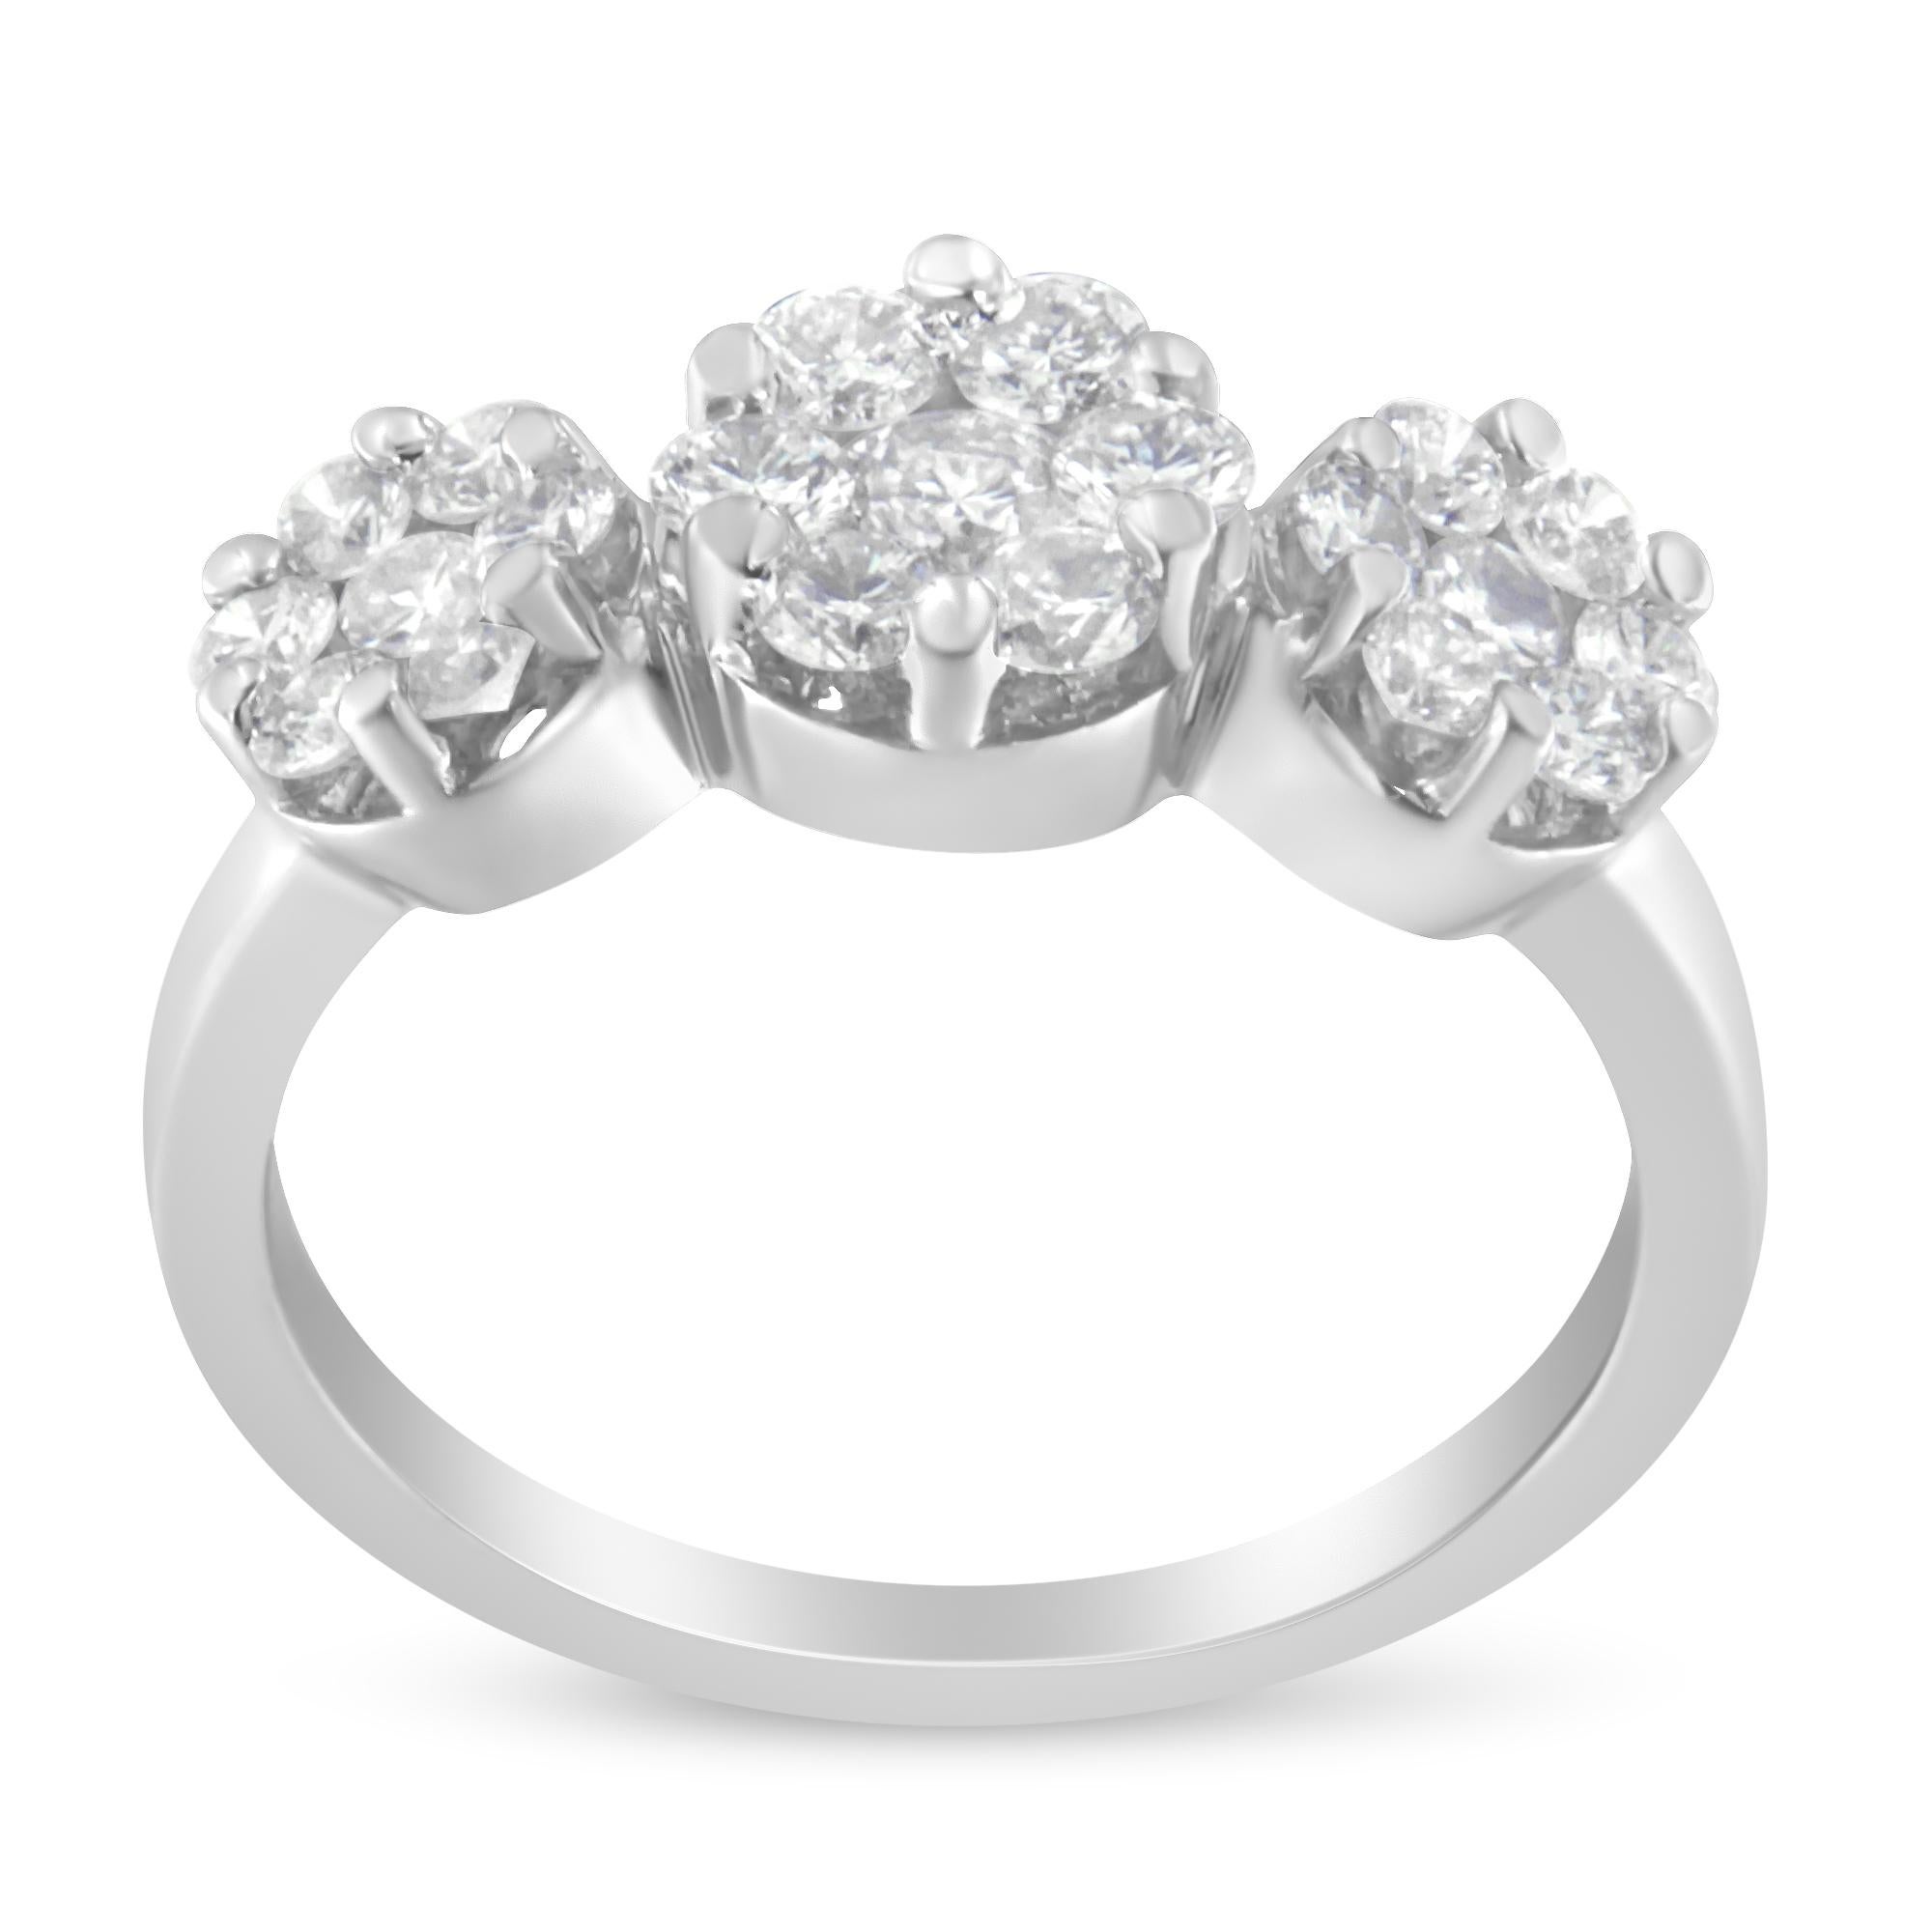 A diamond cluster ring that features three round clusters of round diamonds that are beautifully created in a floral design. This delicate ring has a 14 karat white gold band and a total diamond weight of 1 1/4 carats. Product features:
Diamond